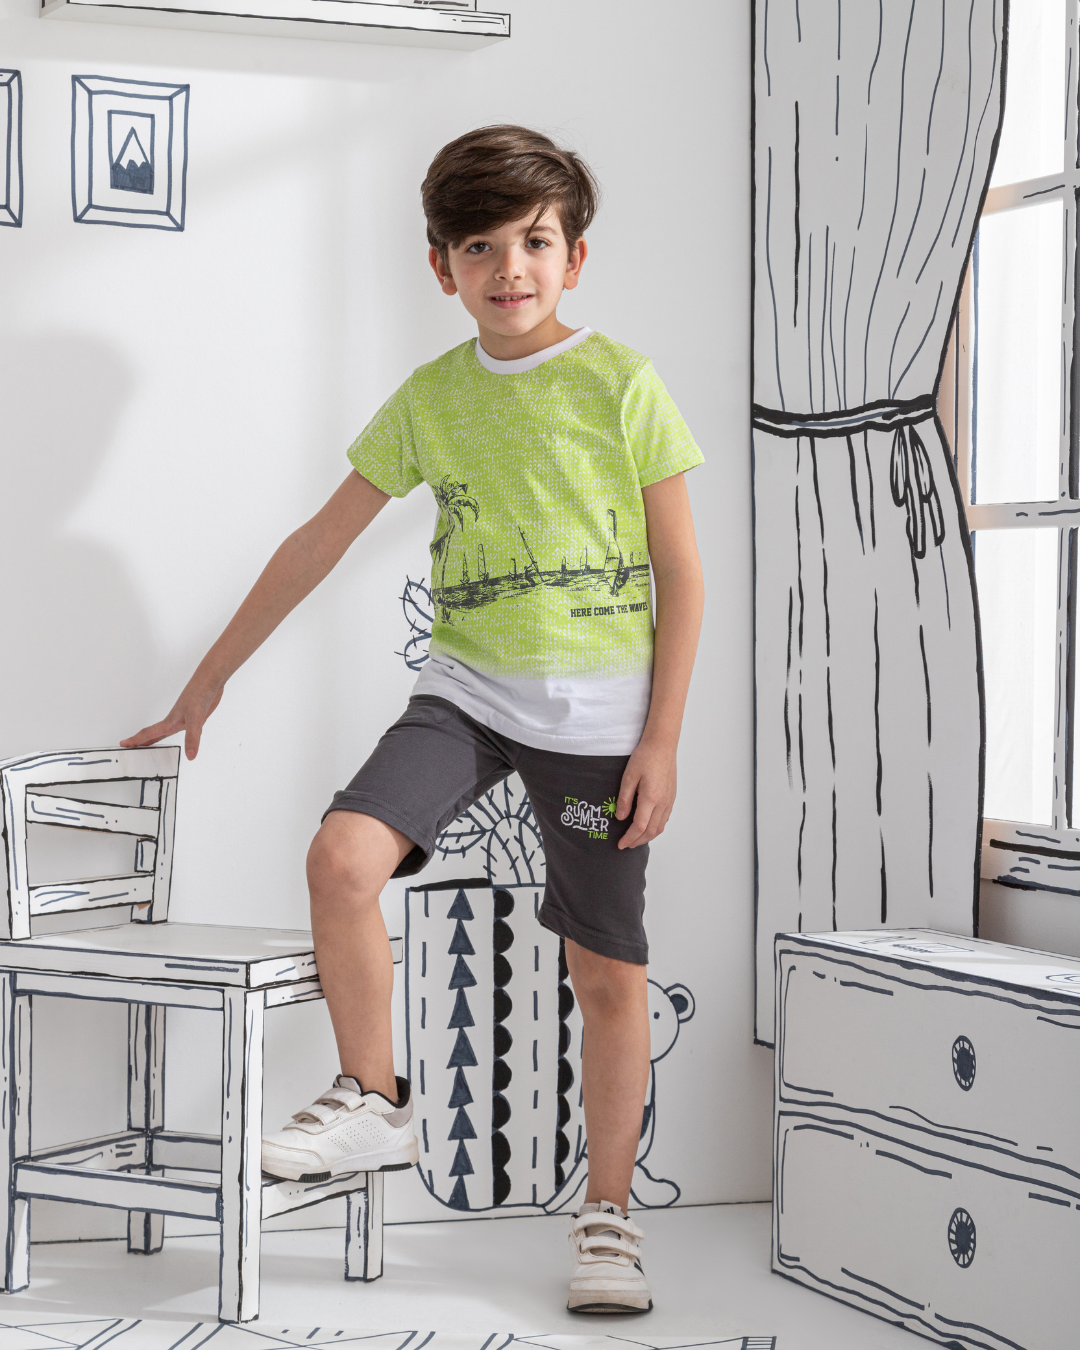 HERE COME THE WAVES Boys' pajamas, half-sleeve palm print T-shirt and shorts